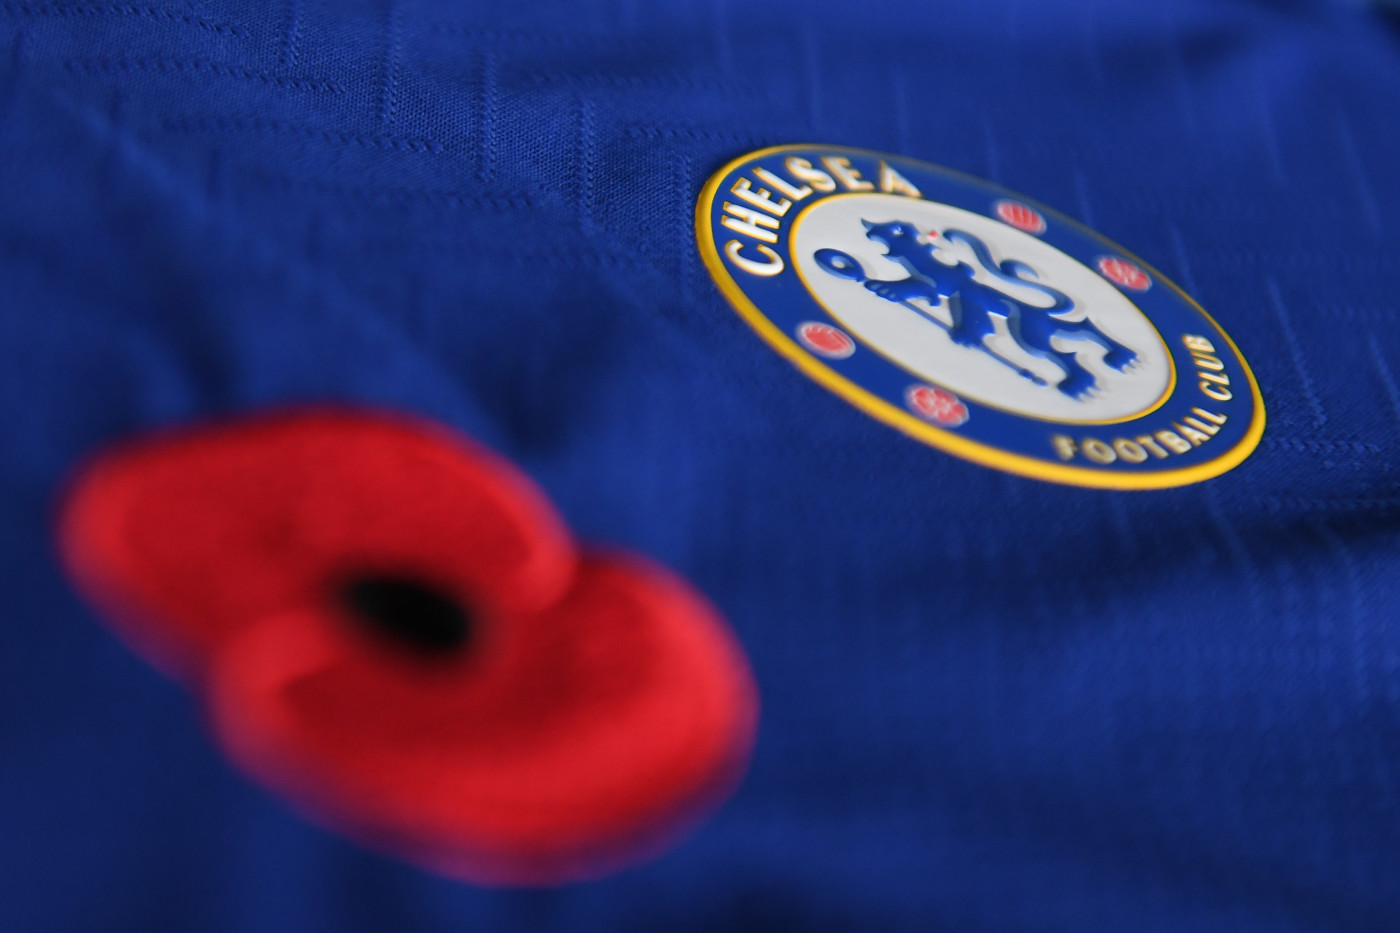 editorial/news/2021/10/26/ChelseaFoundation_Remembrance